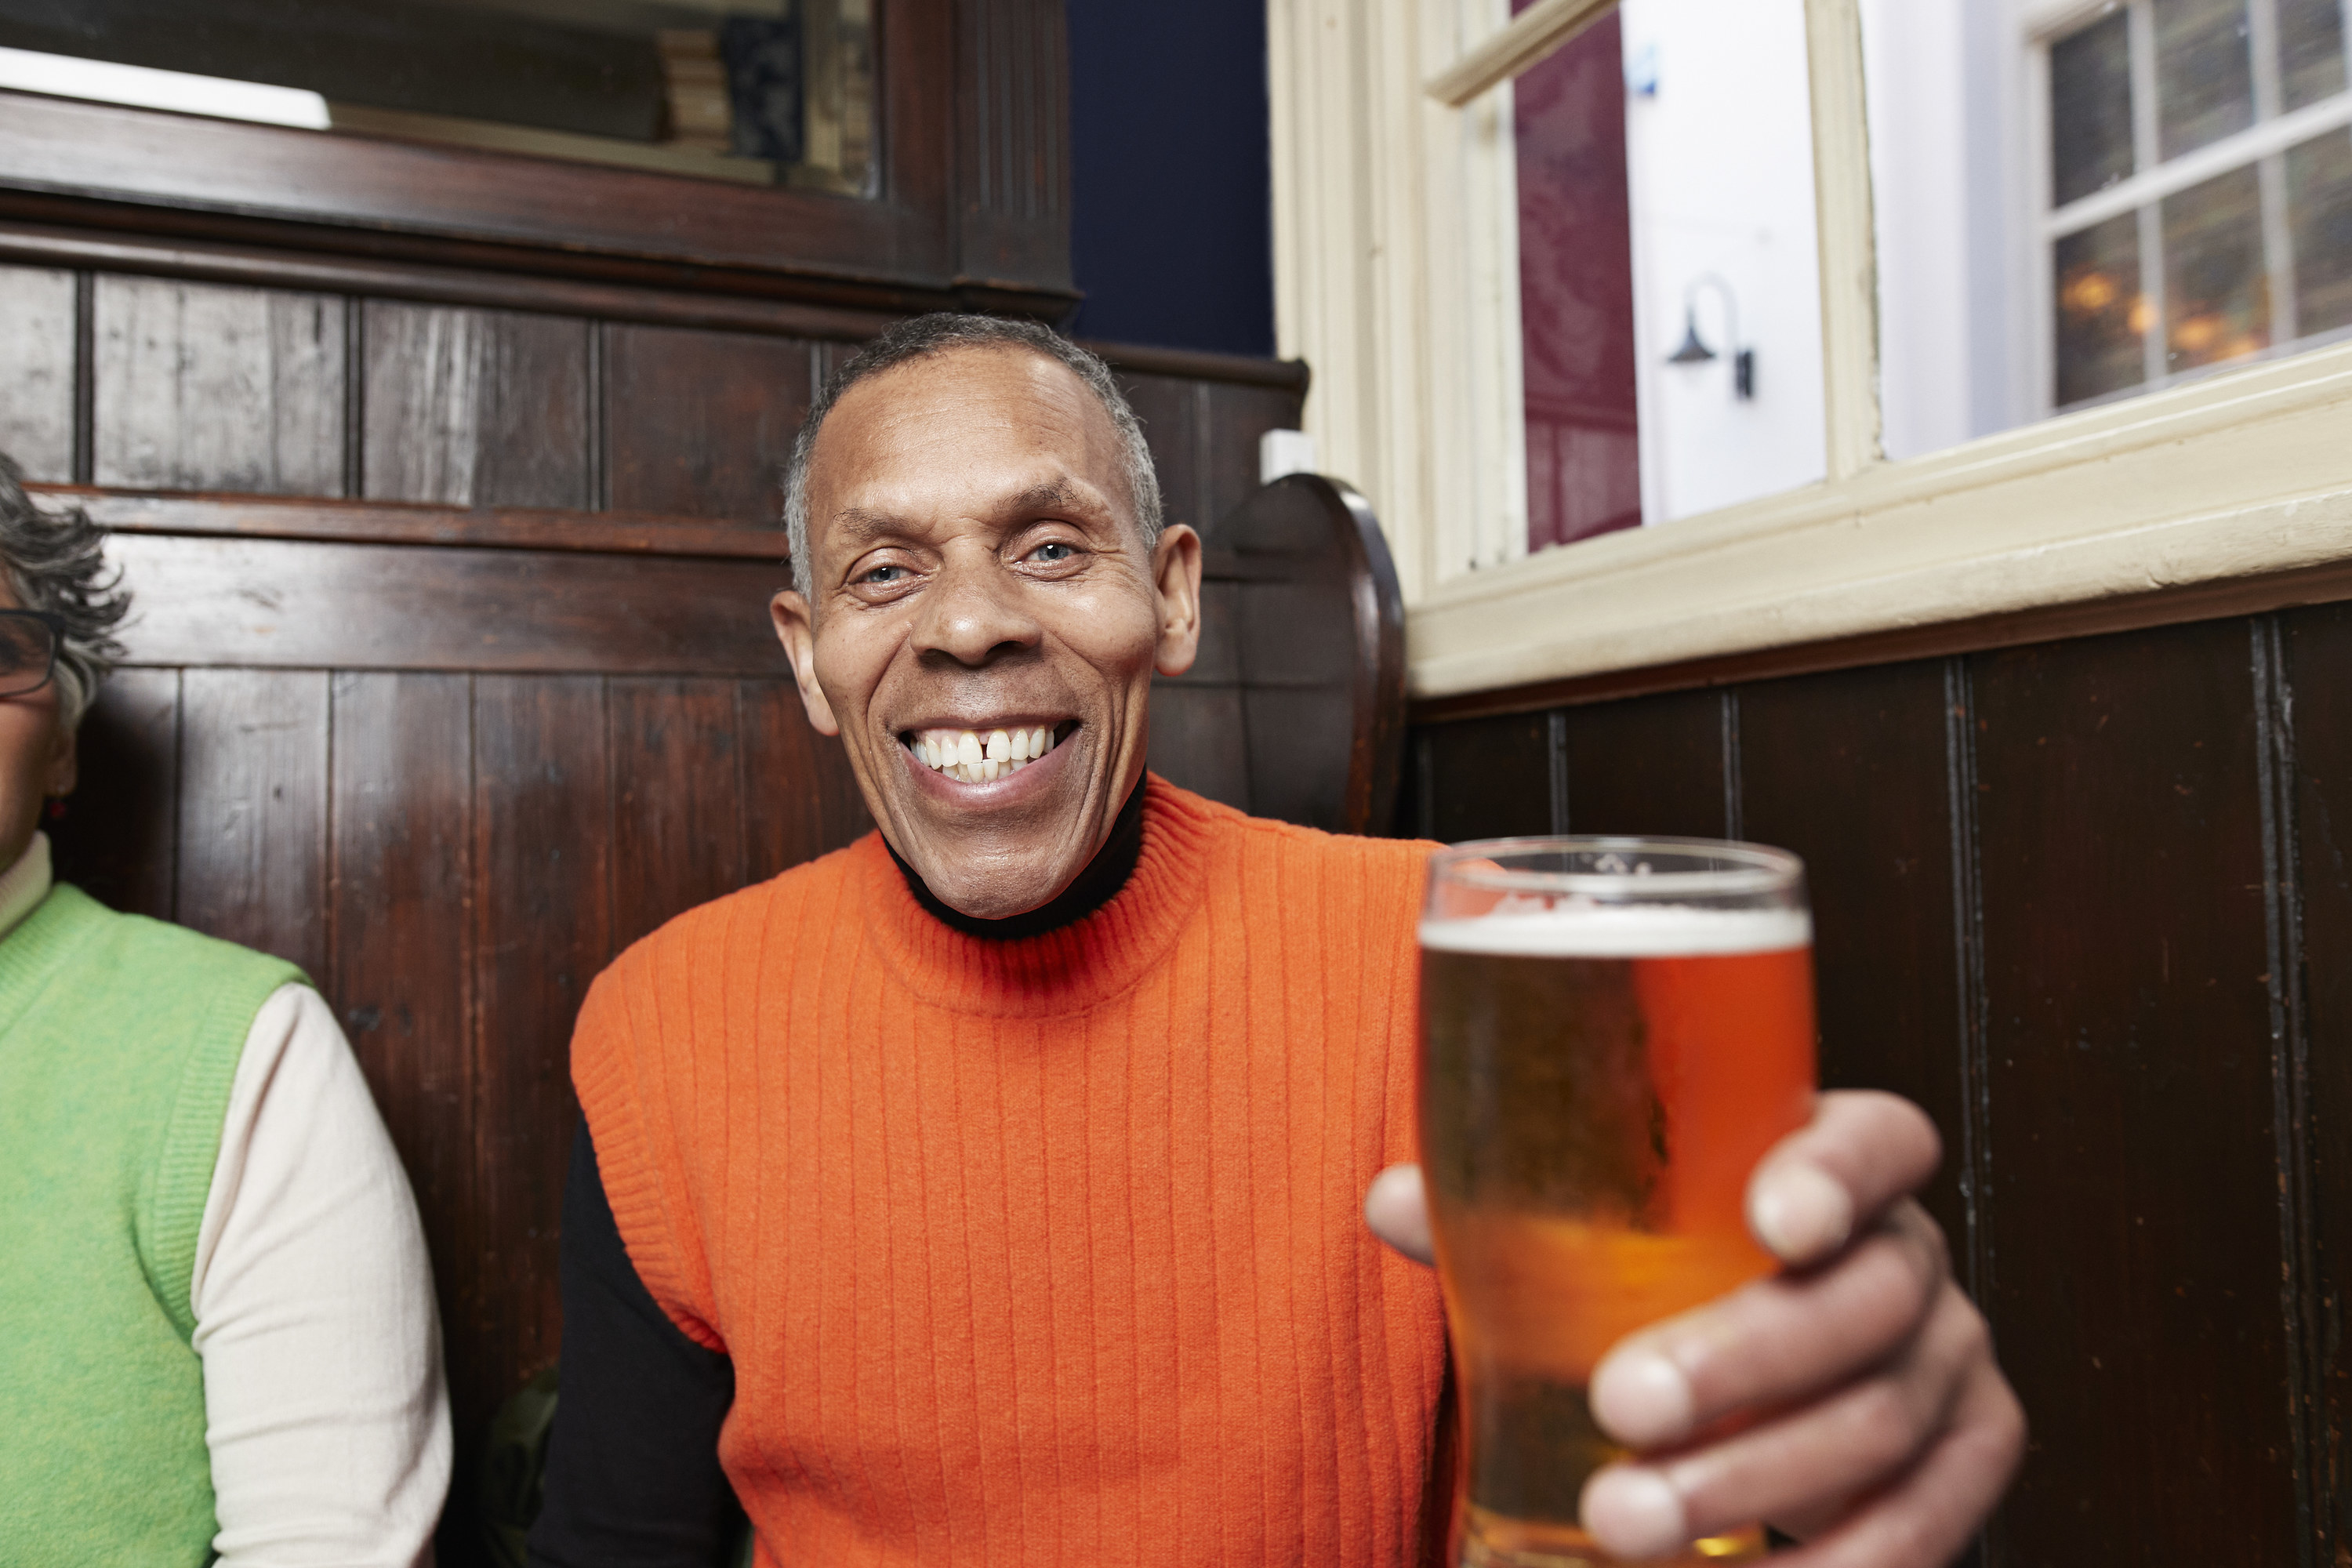 Smiling man sitting in a pub and holding a glass of beer